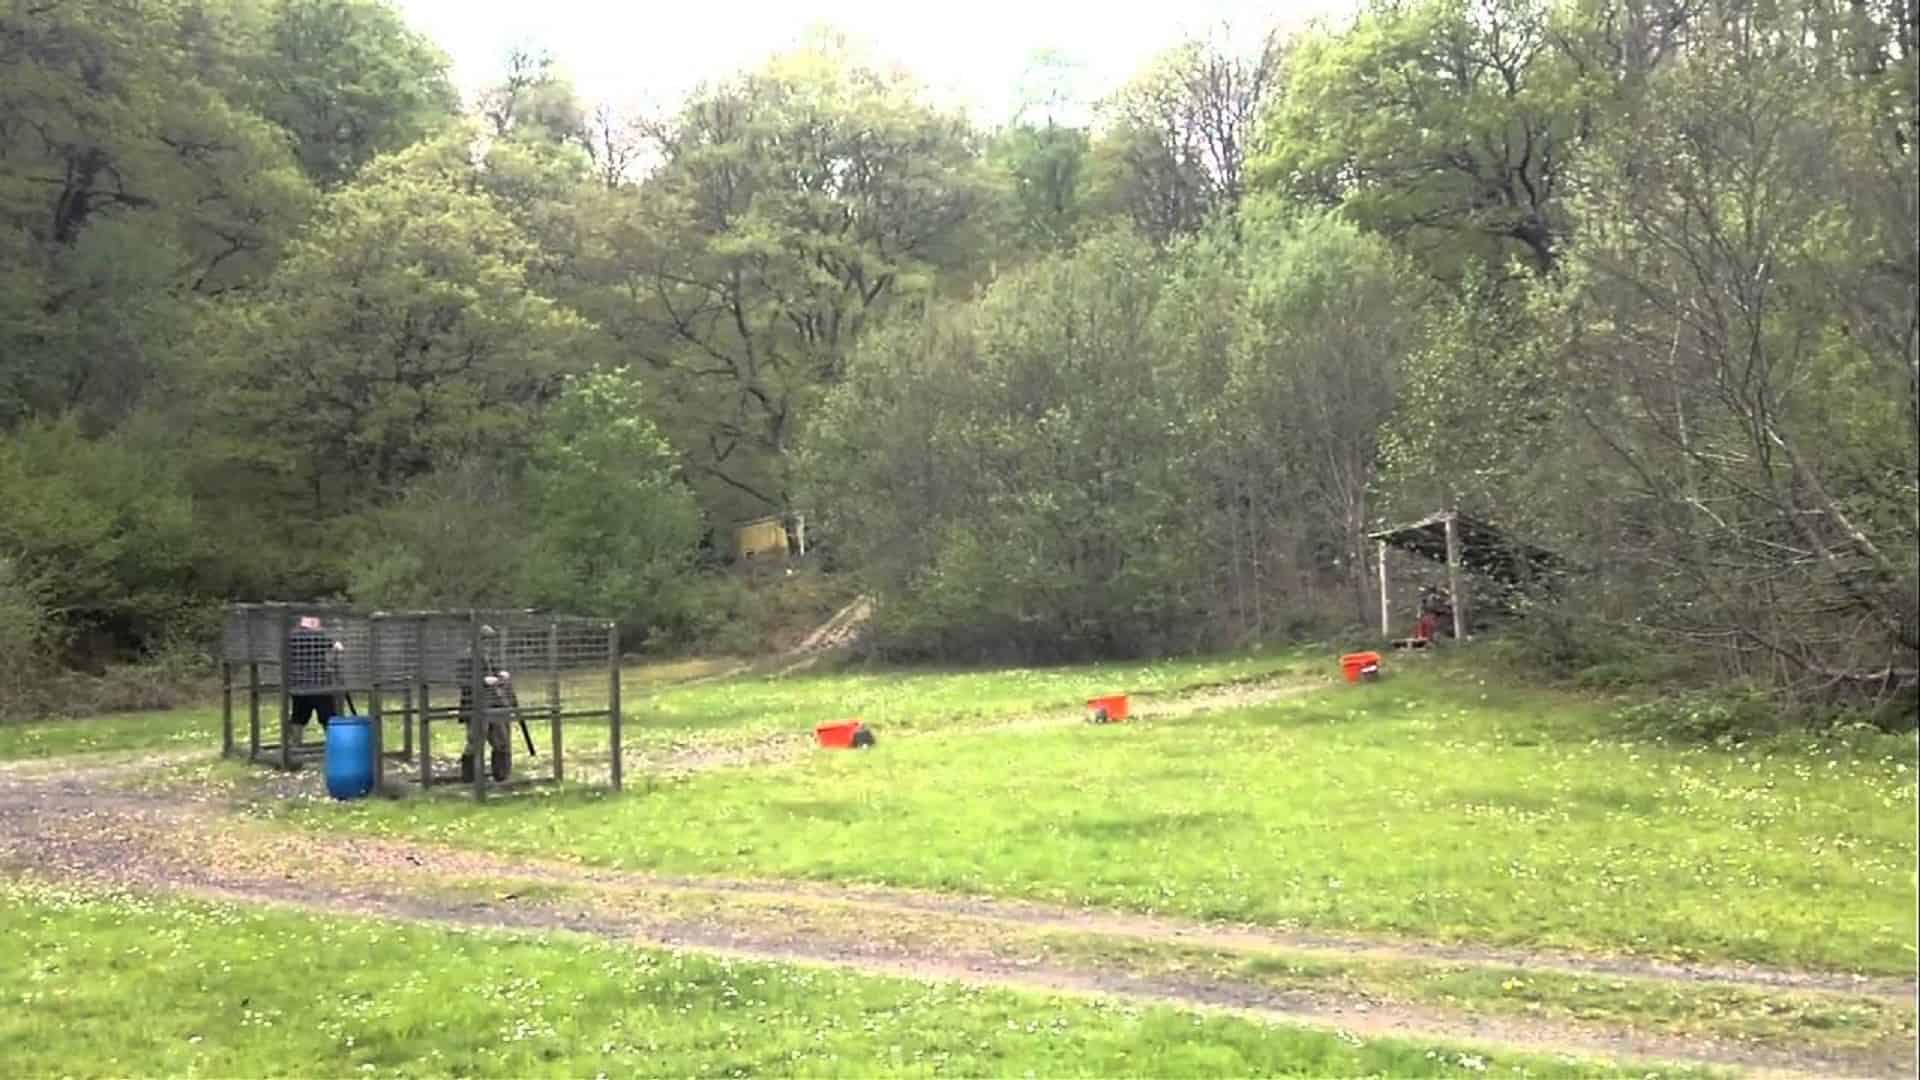 Dovey valley shooting ground in UK